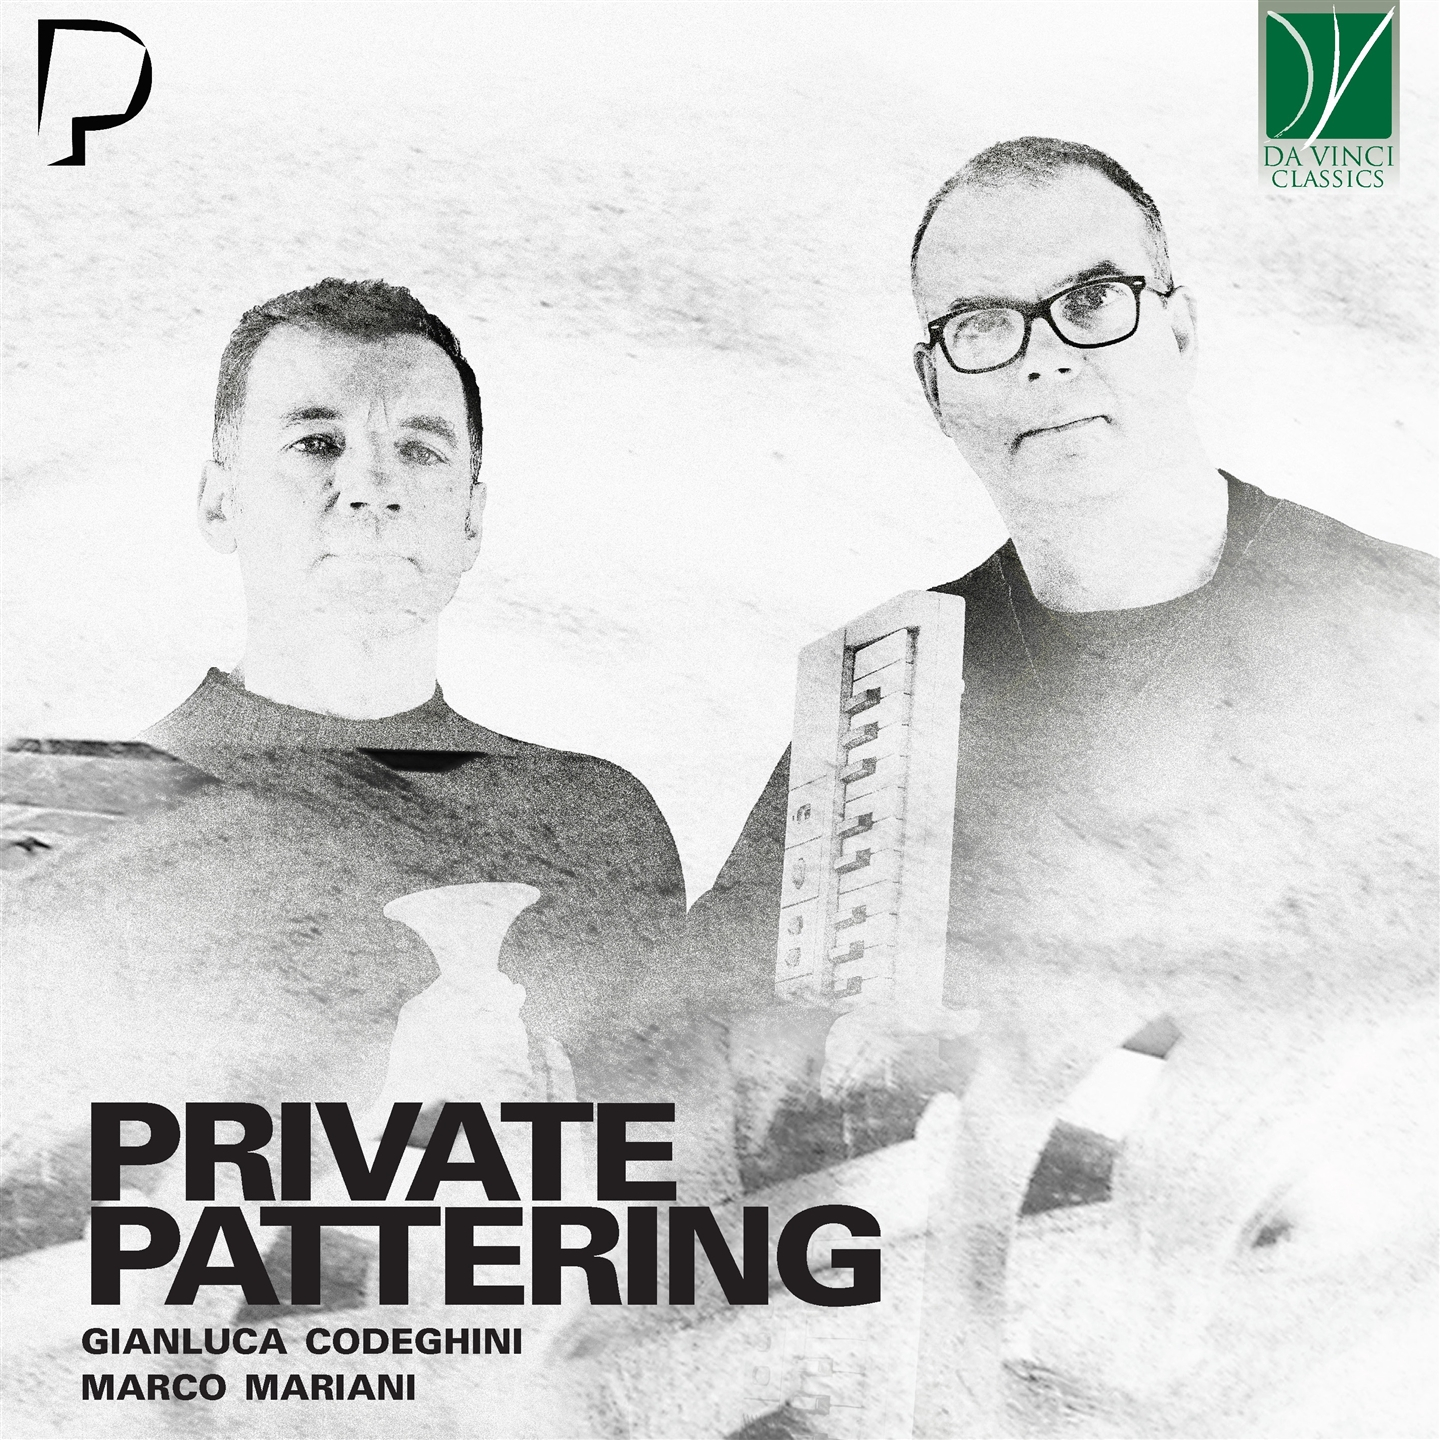 PRIVATE PATTERING